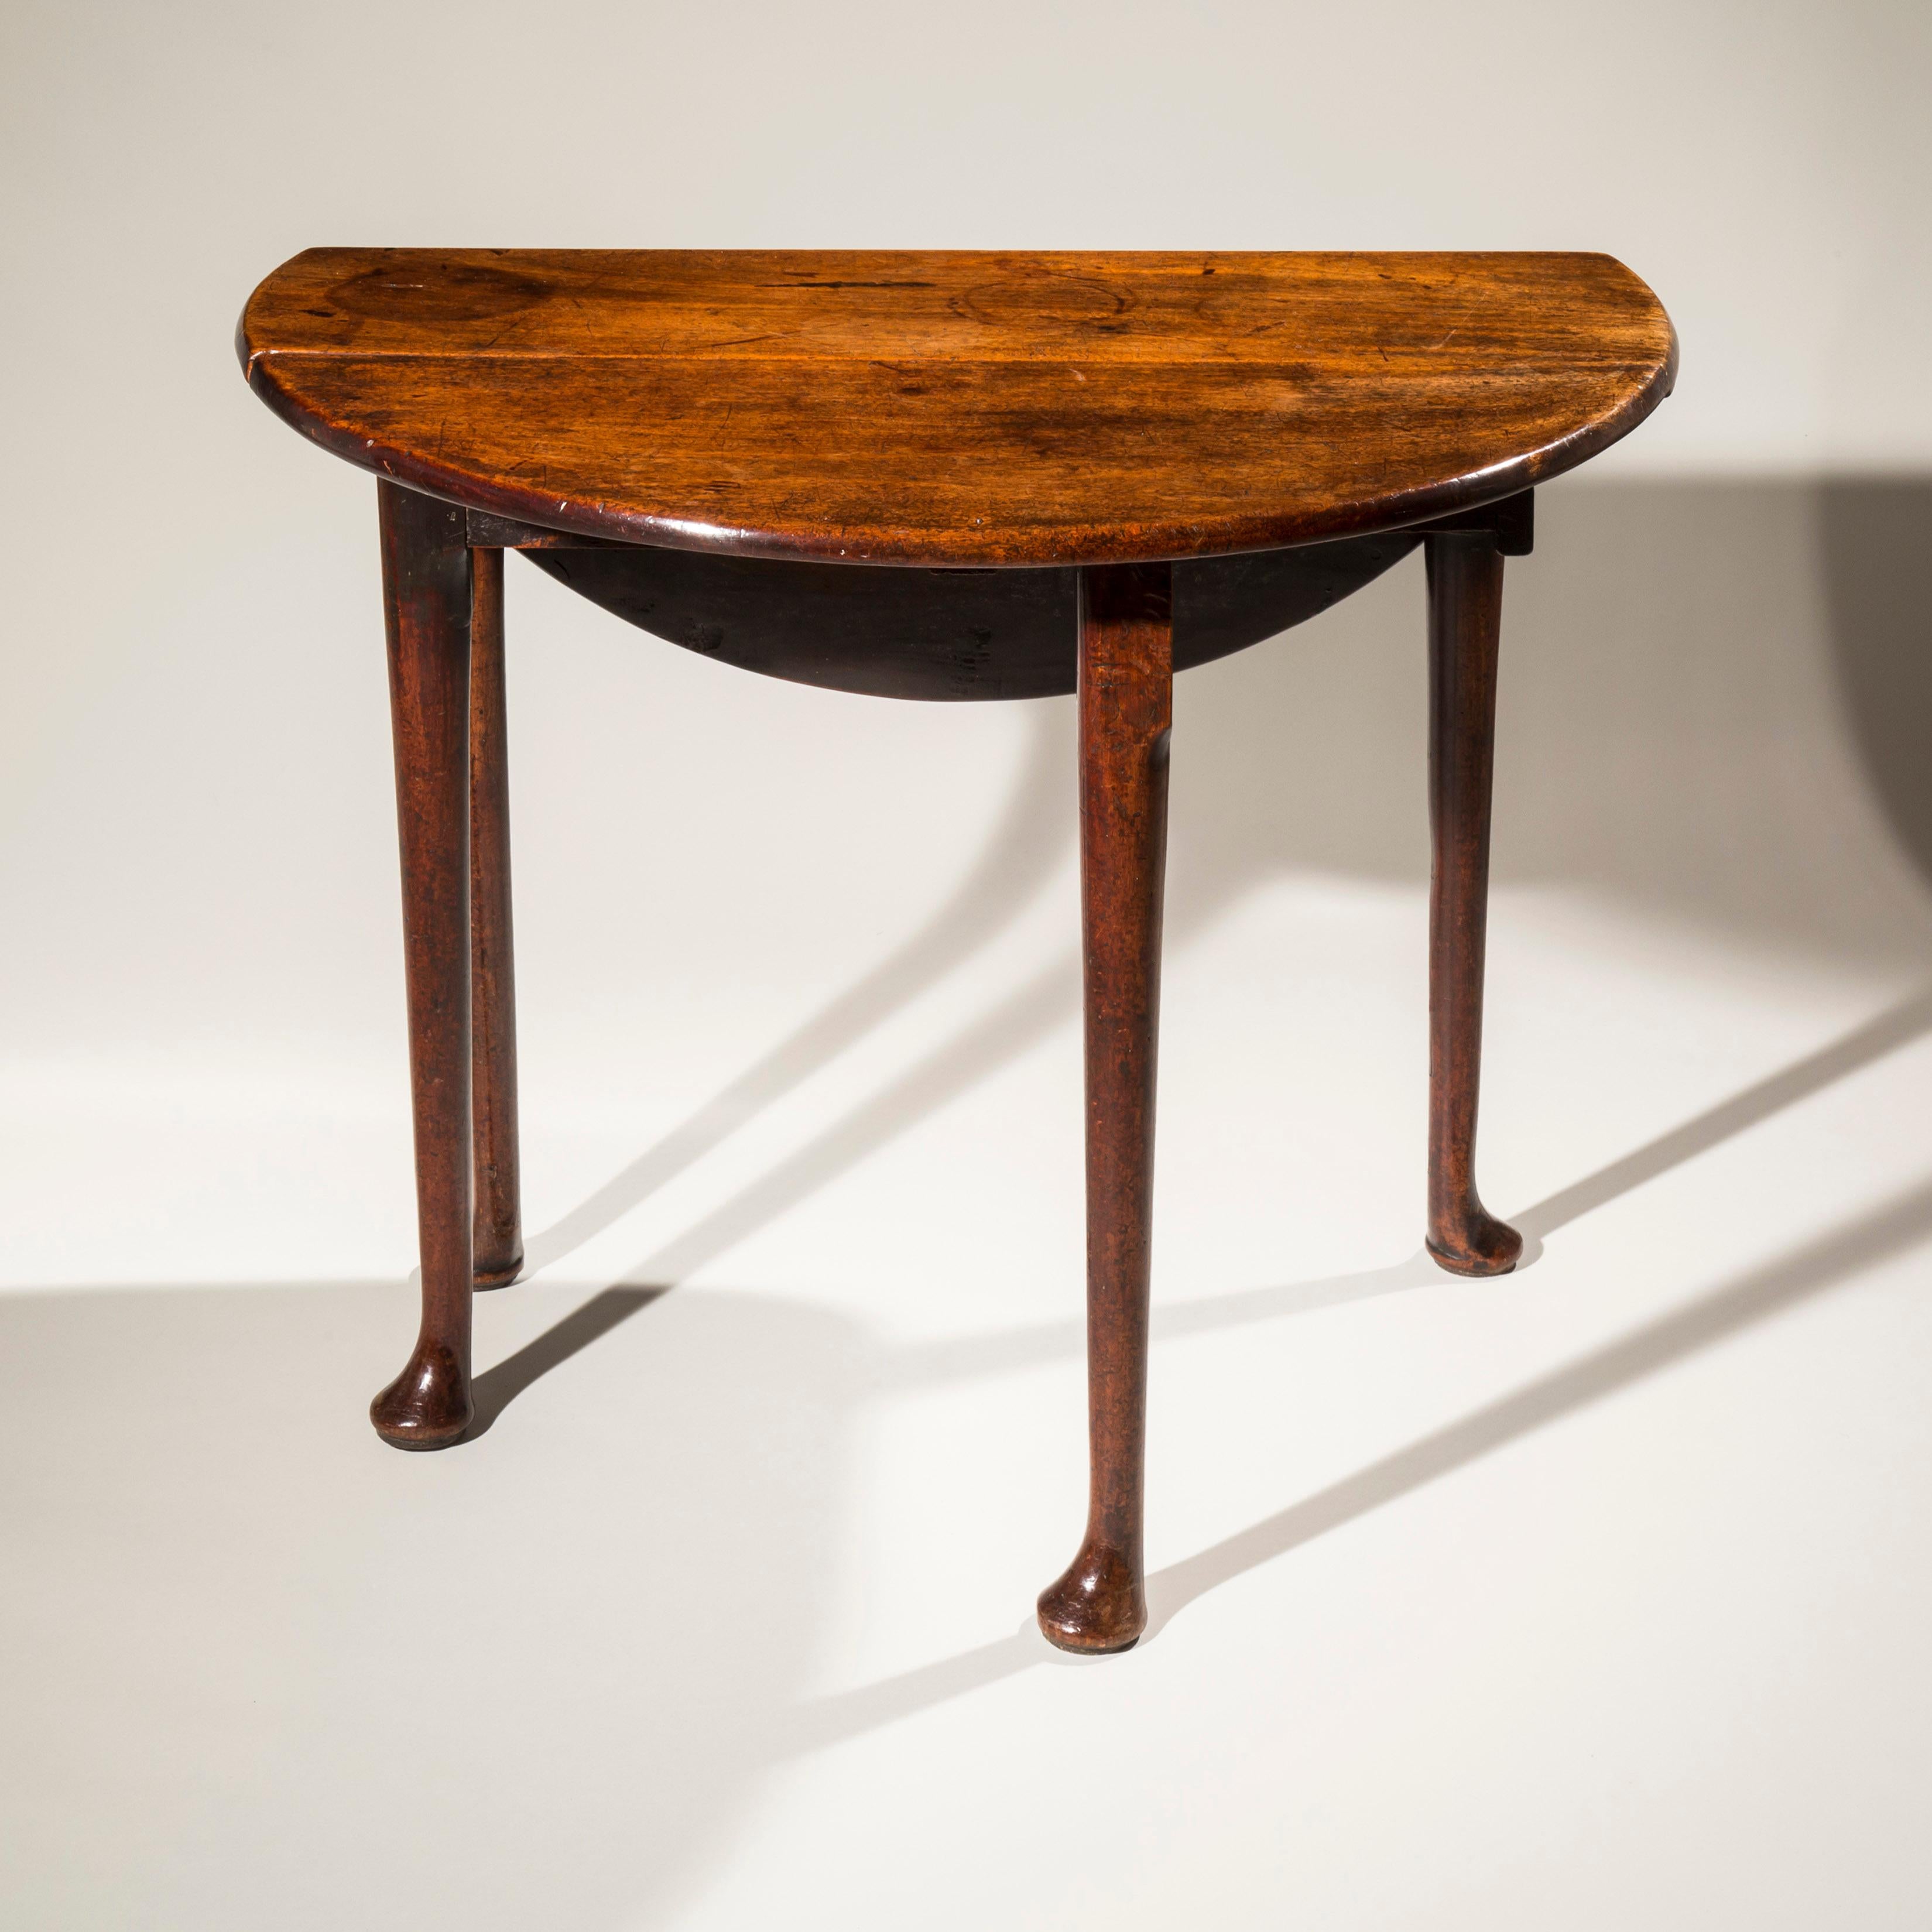 British Queen Anne Small Red Walnut Table